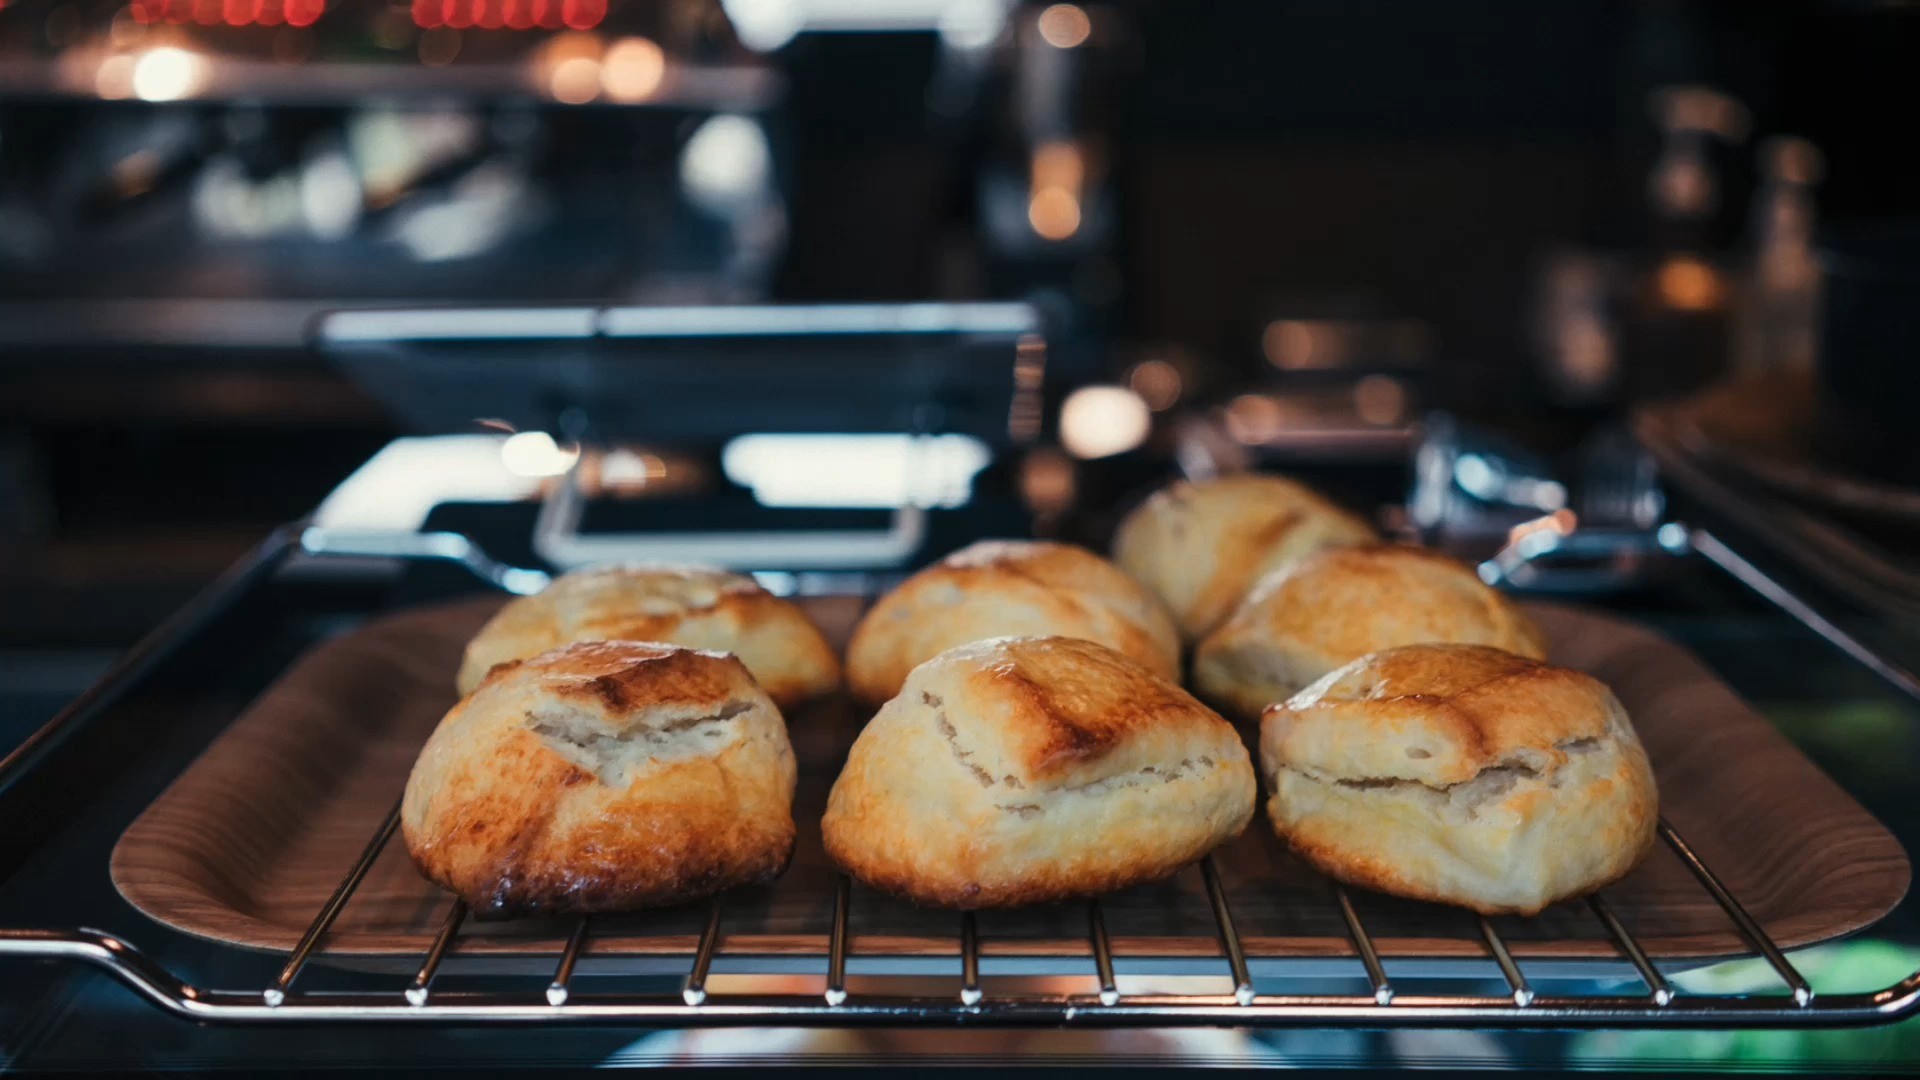 Our high-quality products and exceptional services help industrial bakeries achieve maximum efficiency